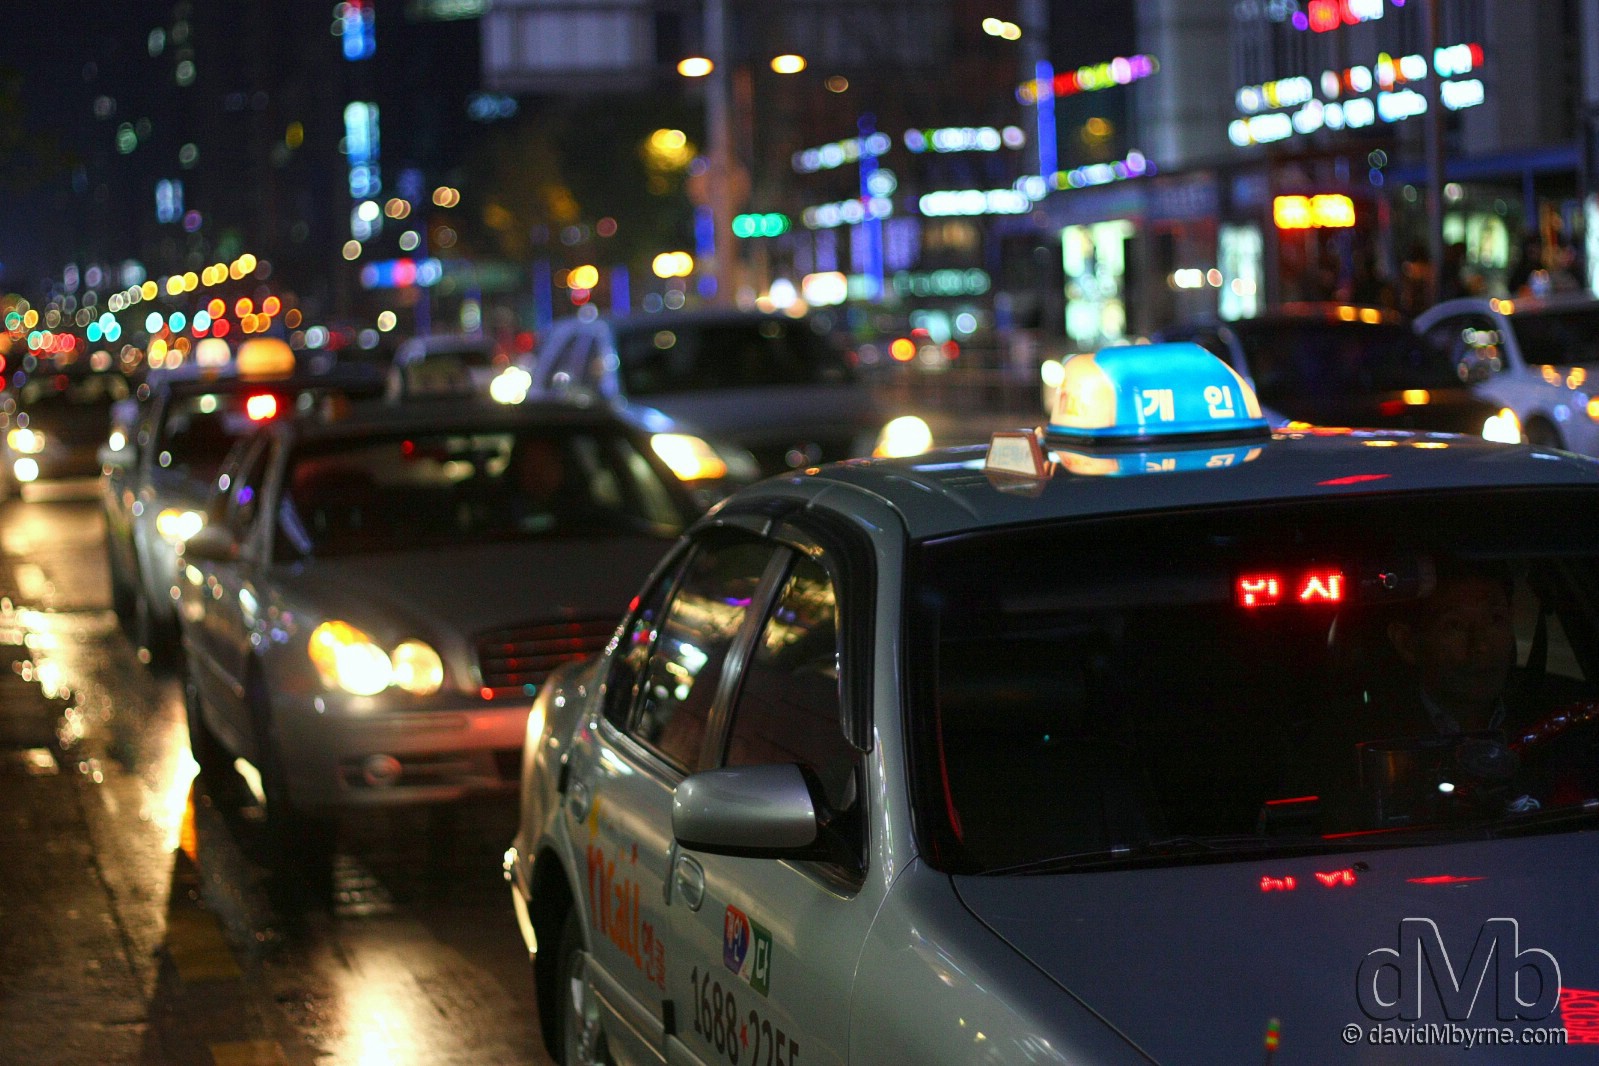 Taxis on the streets of Gangnam, Seoul, South Korea. November 18th, 2011 (50mm, 1/200sec, f/1.8, iso800)